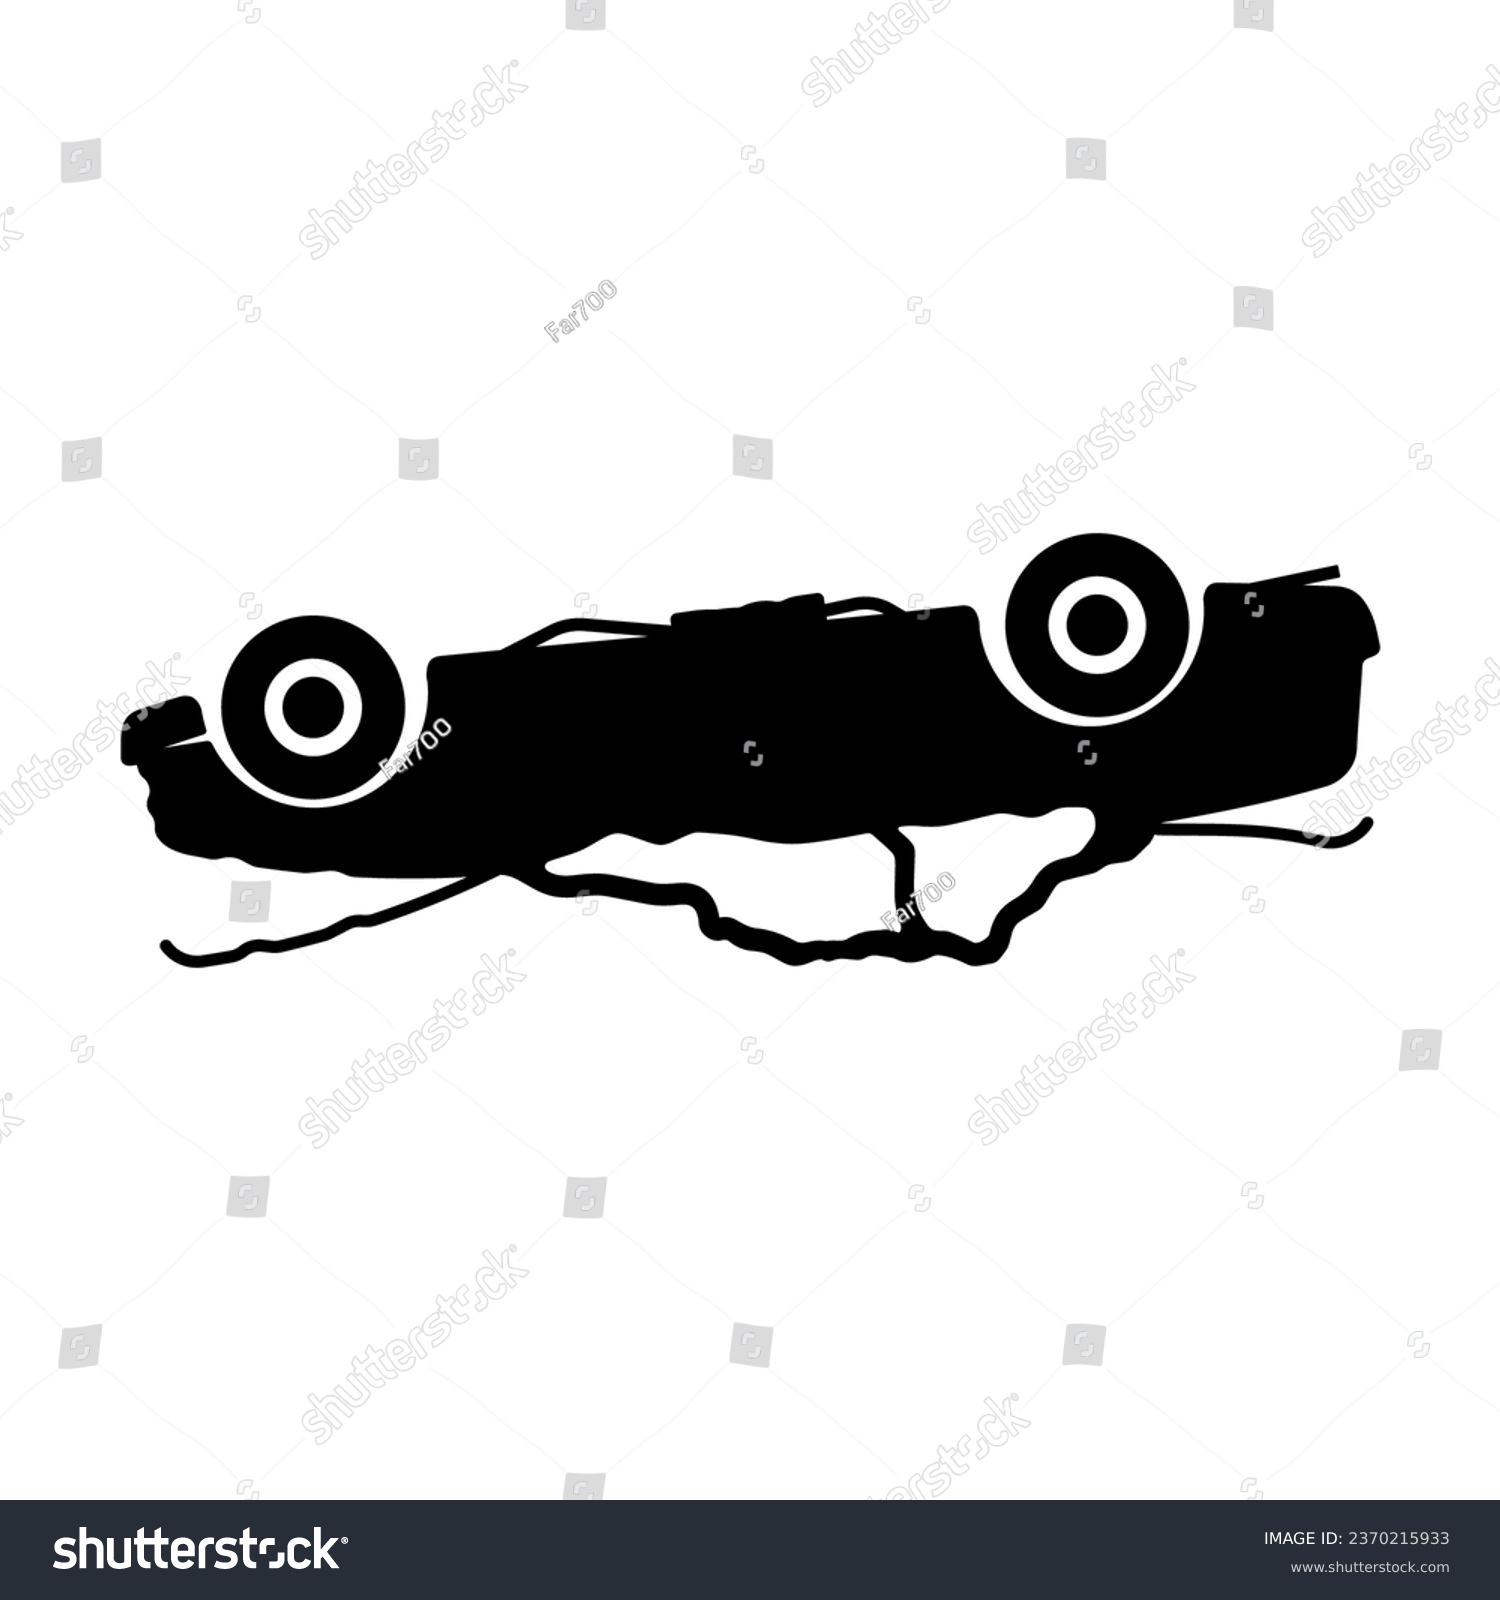 Overturned damaged car icon. Accident, disaster. Road accident. Black silhouette. Side view. Vector simple flat graphic illustration. Isolated object on a white background. Isolate. #2370215933